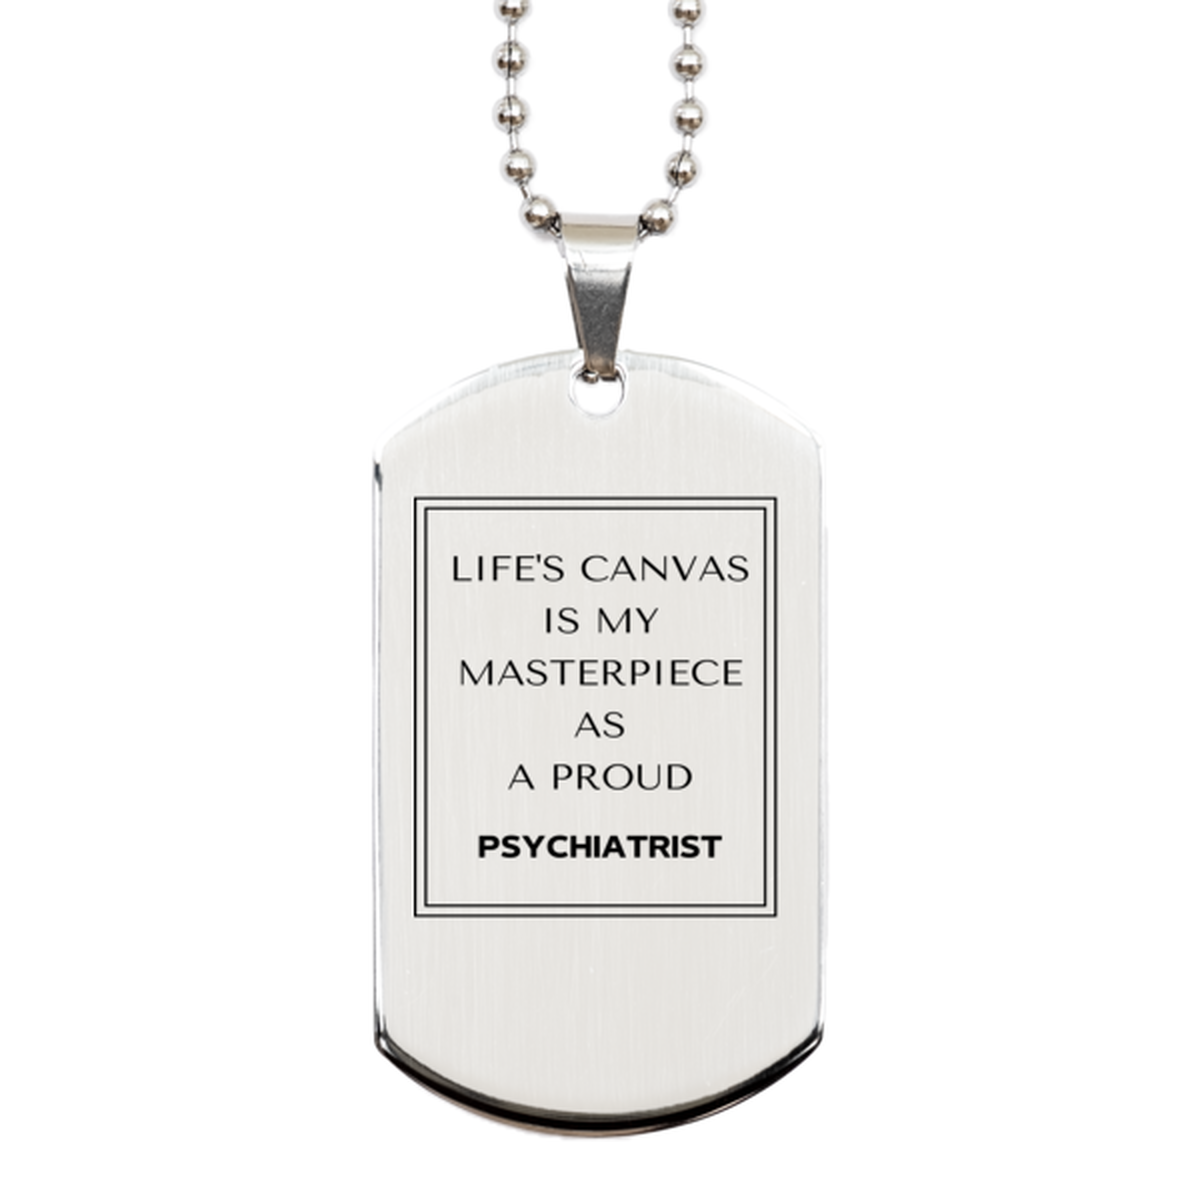 Proud Psychiatrist Gifts, Life's canvas is my masterpiece, Epic Birthday Christmas Unique Silver Dog Tag For Psychiatrist, Coworkers, Men, Women, Friends